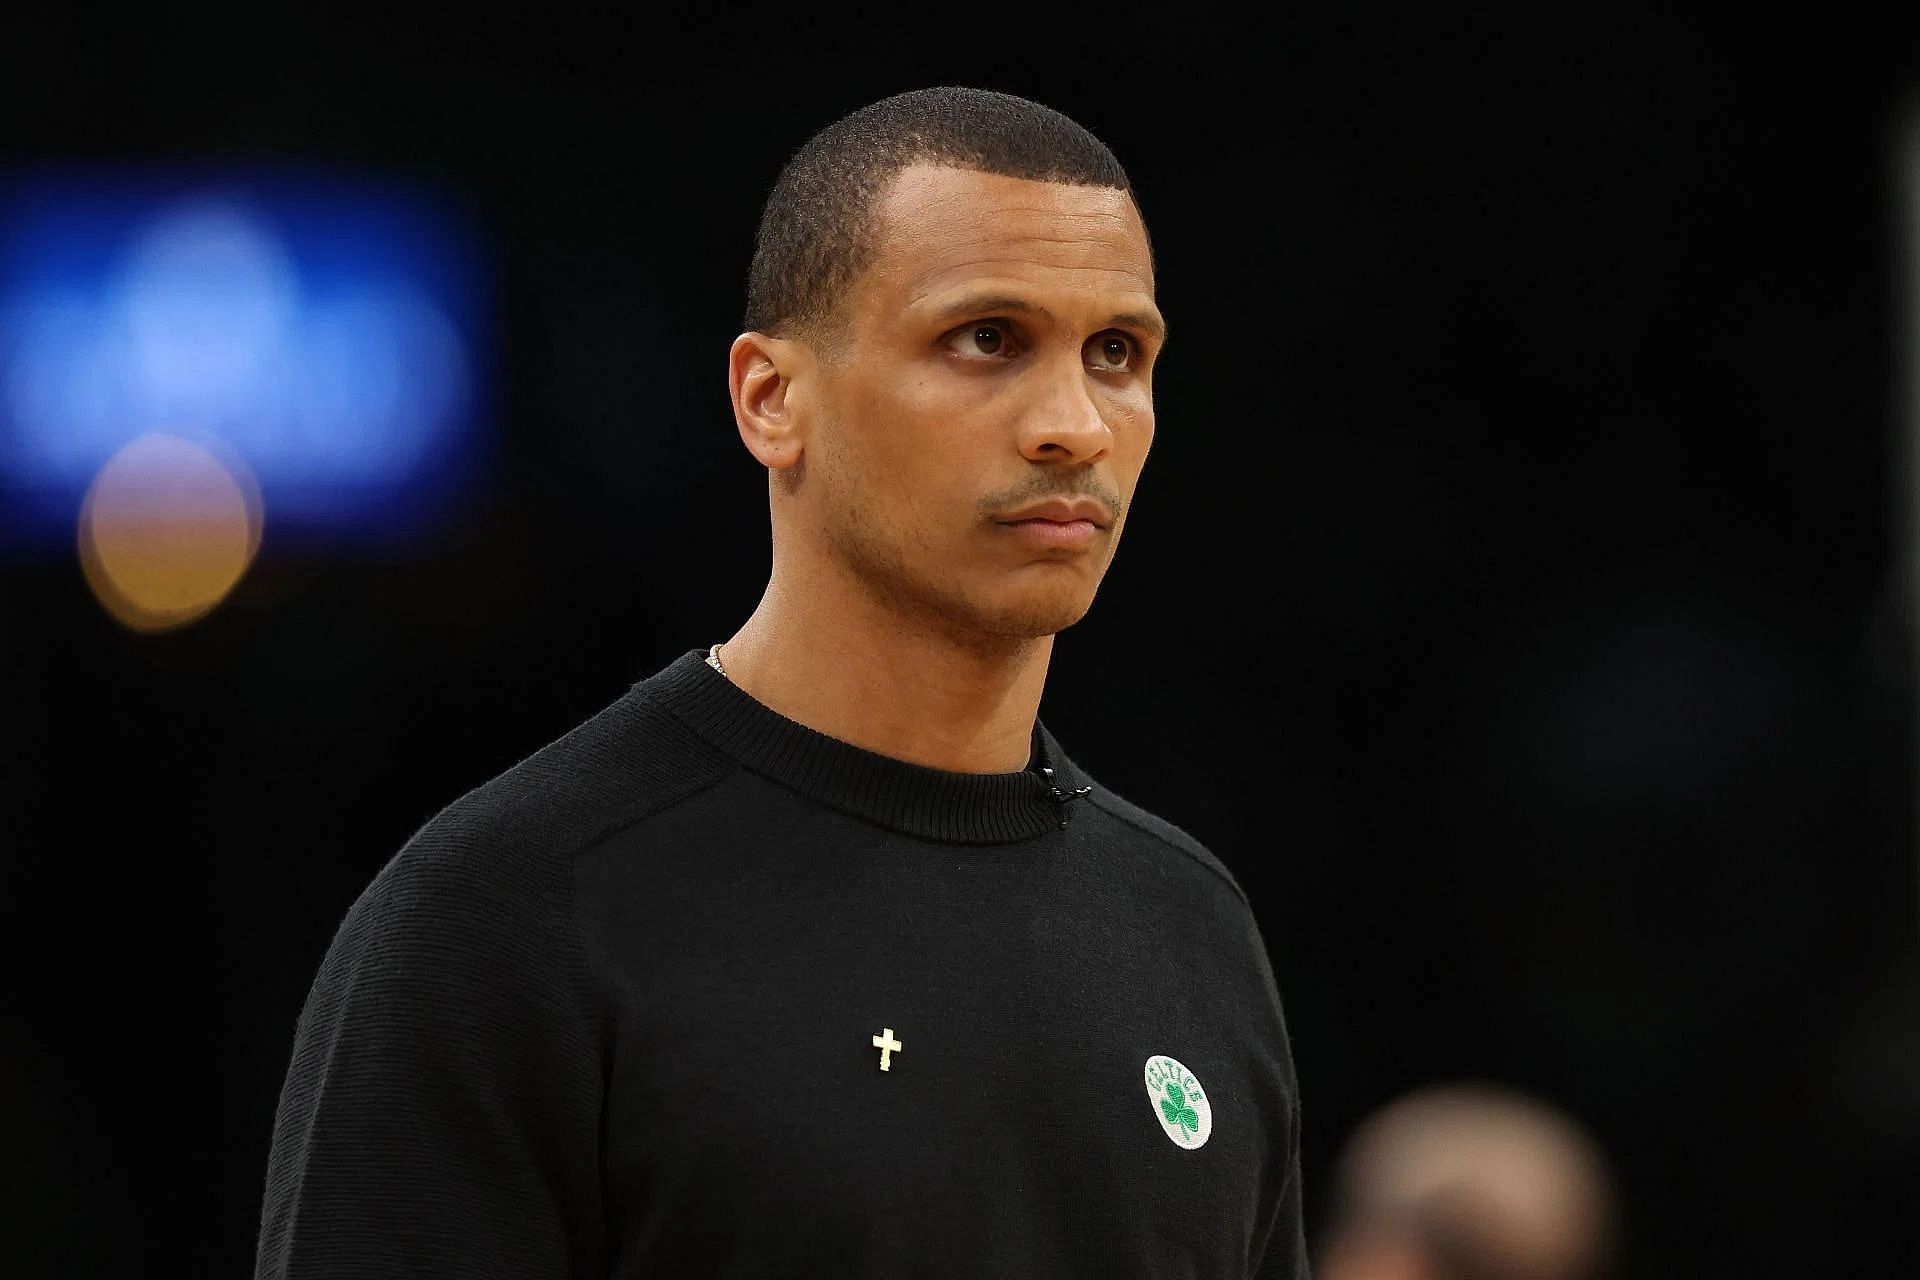 Boston Celtics coach Joe Mazzulla got the ire of the Toronto Raptors after using a challenge late in their game on Saturday..